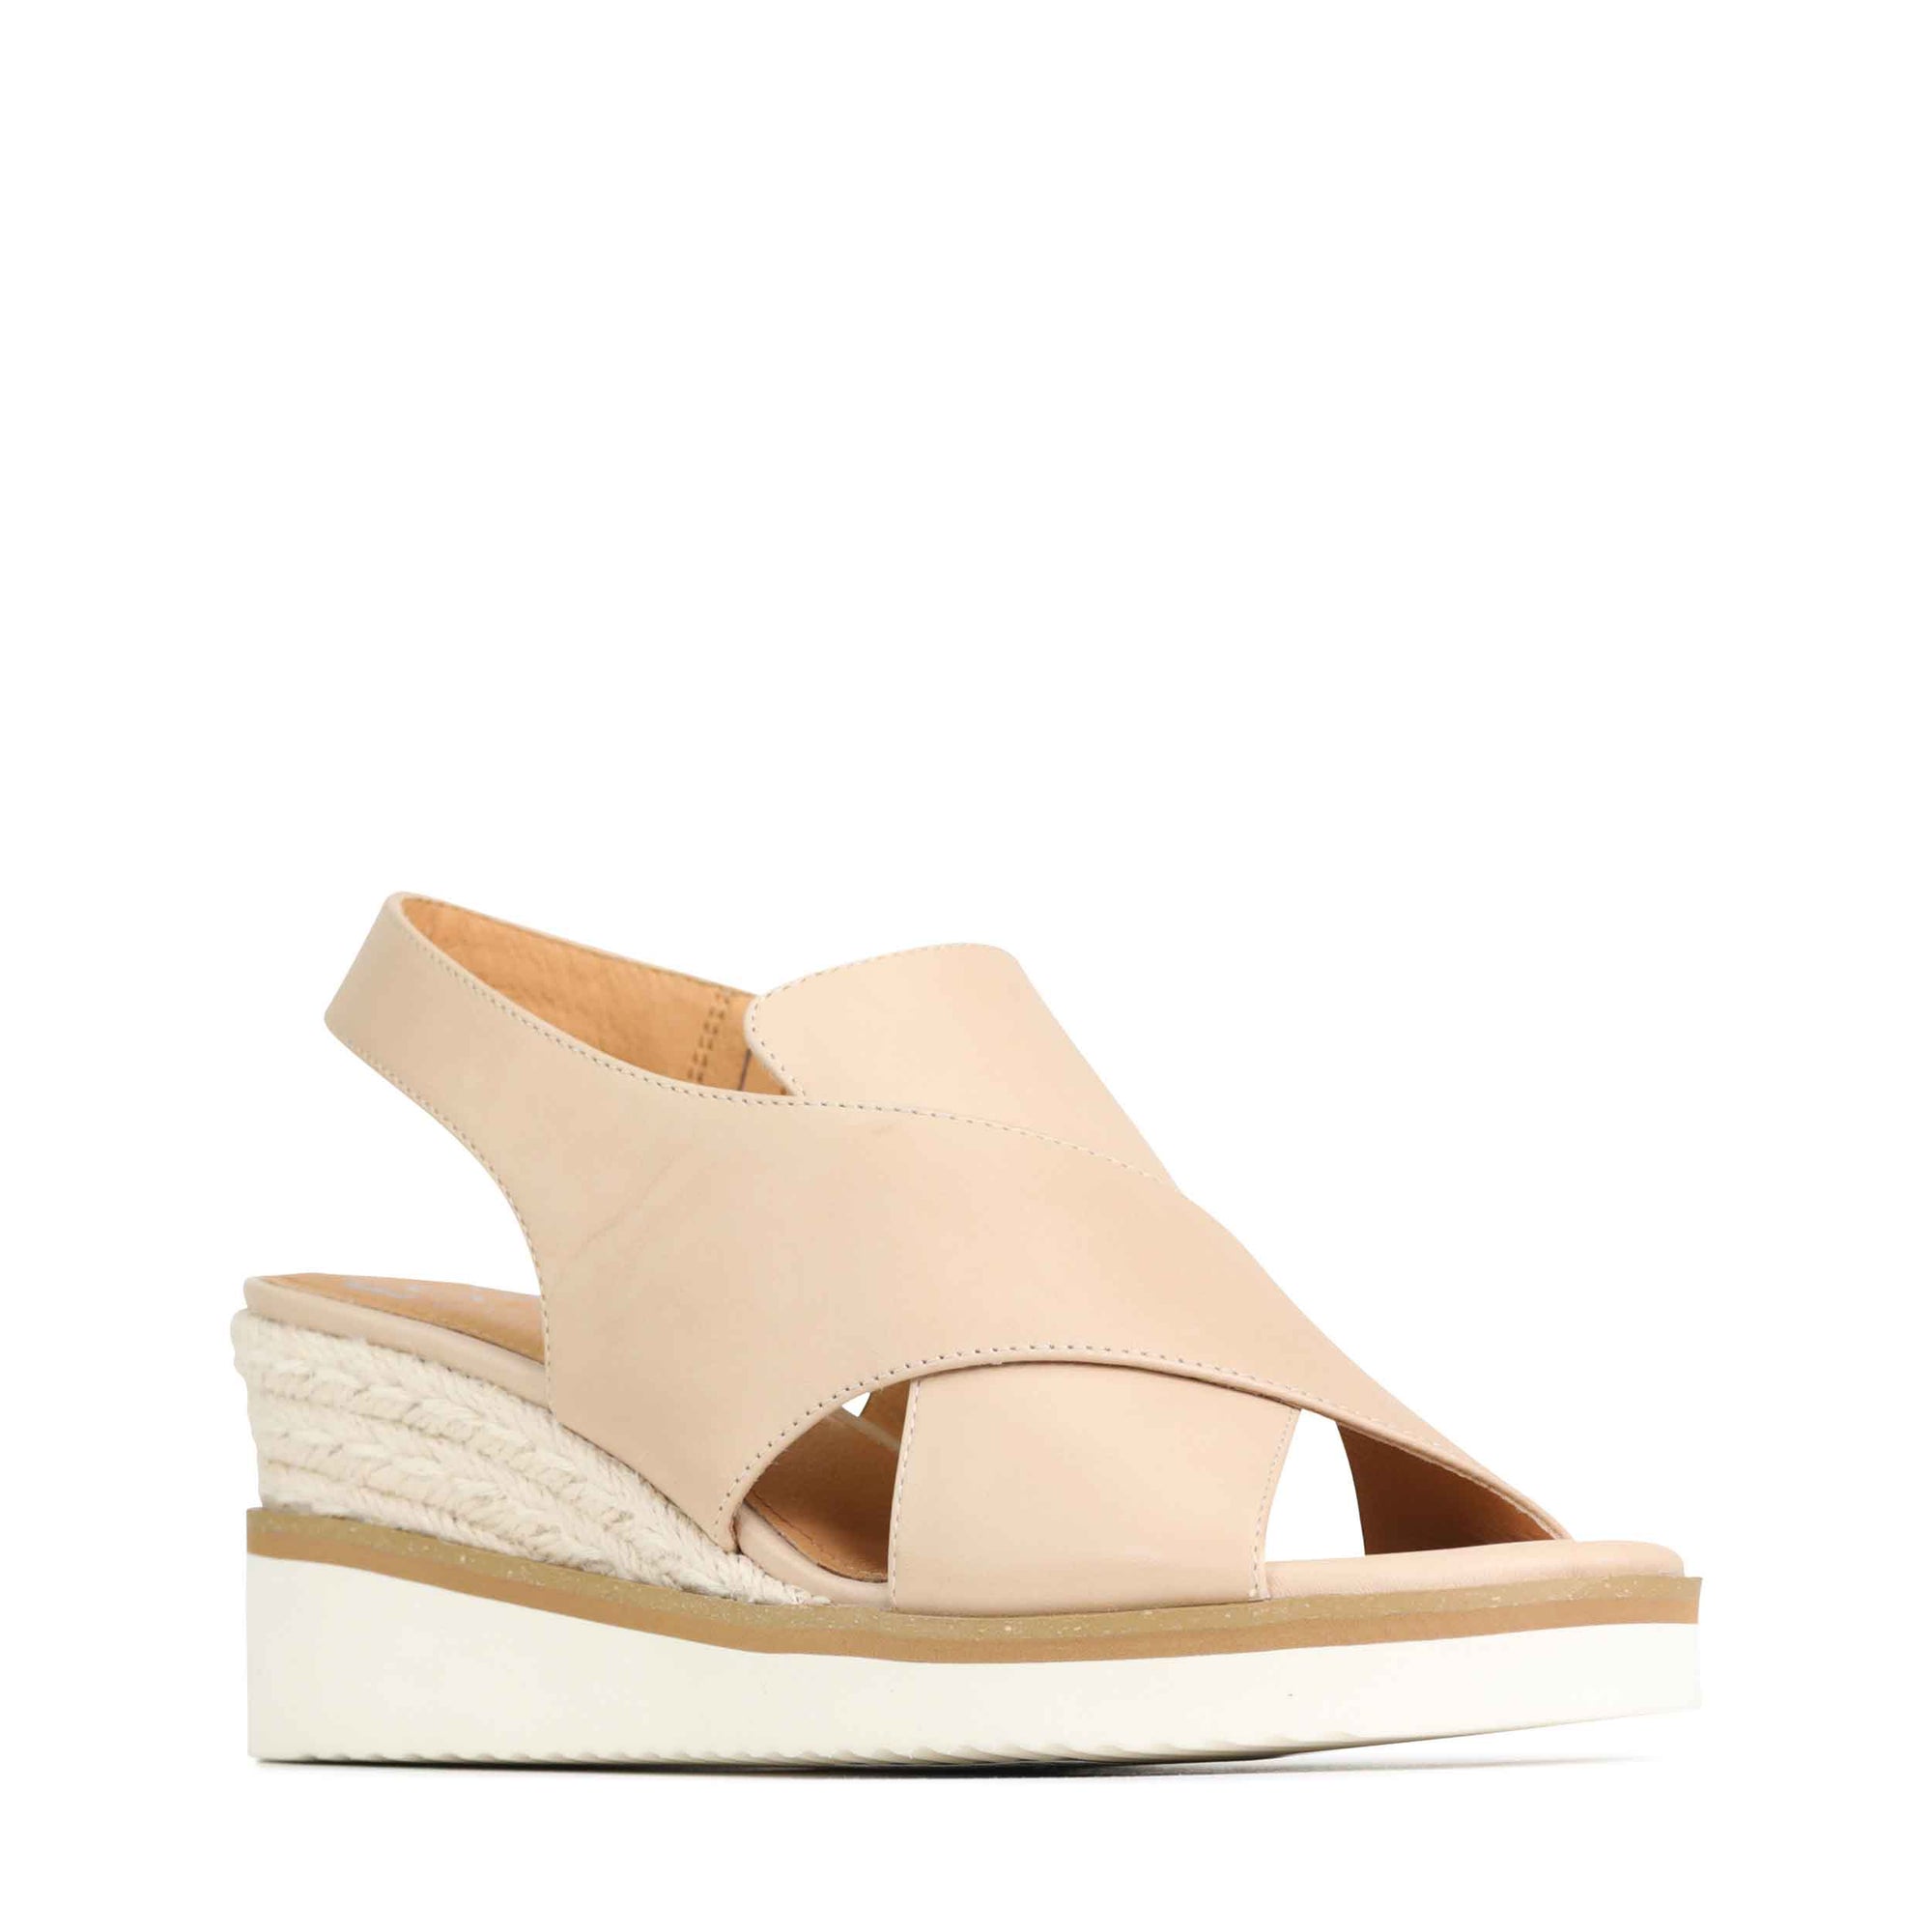 Parallel Culture Shoes and Fashion Online WEDGES EOS LAZING WEDGE NUDE